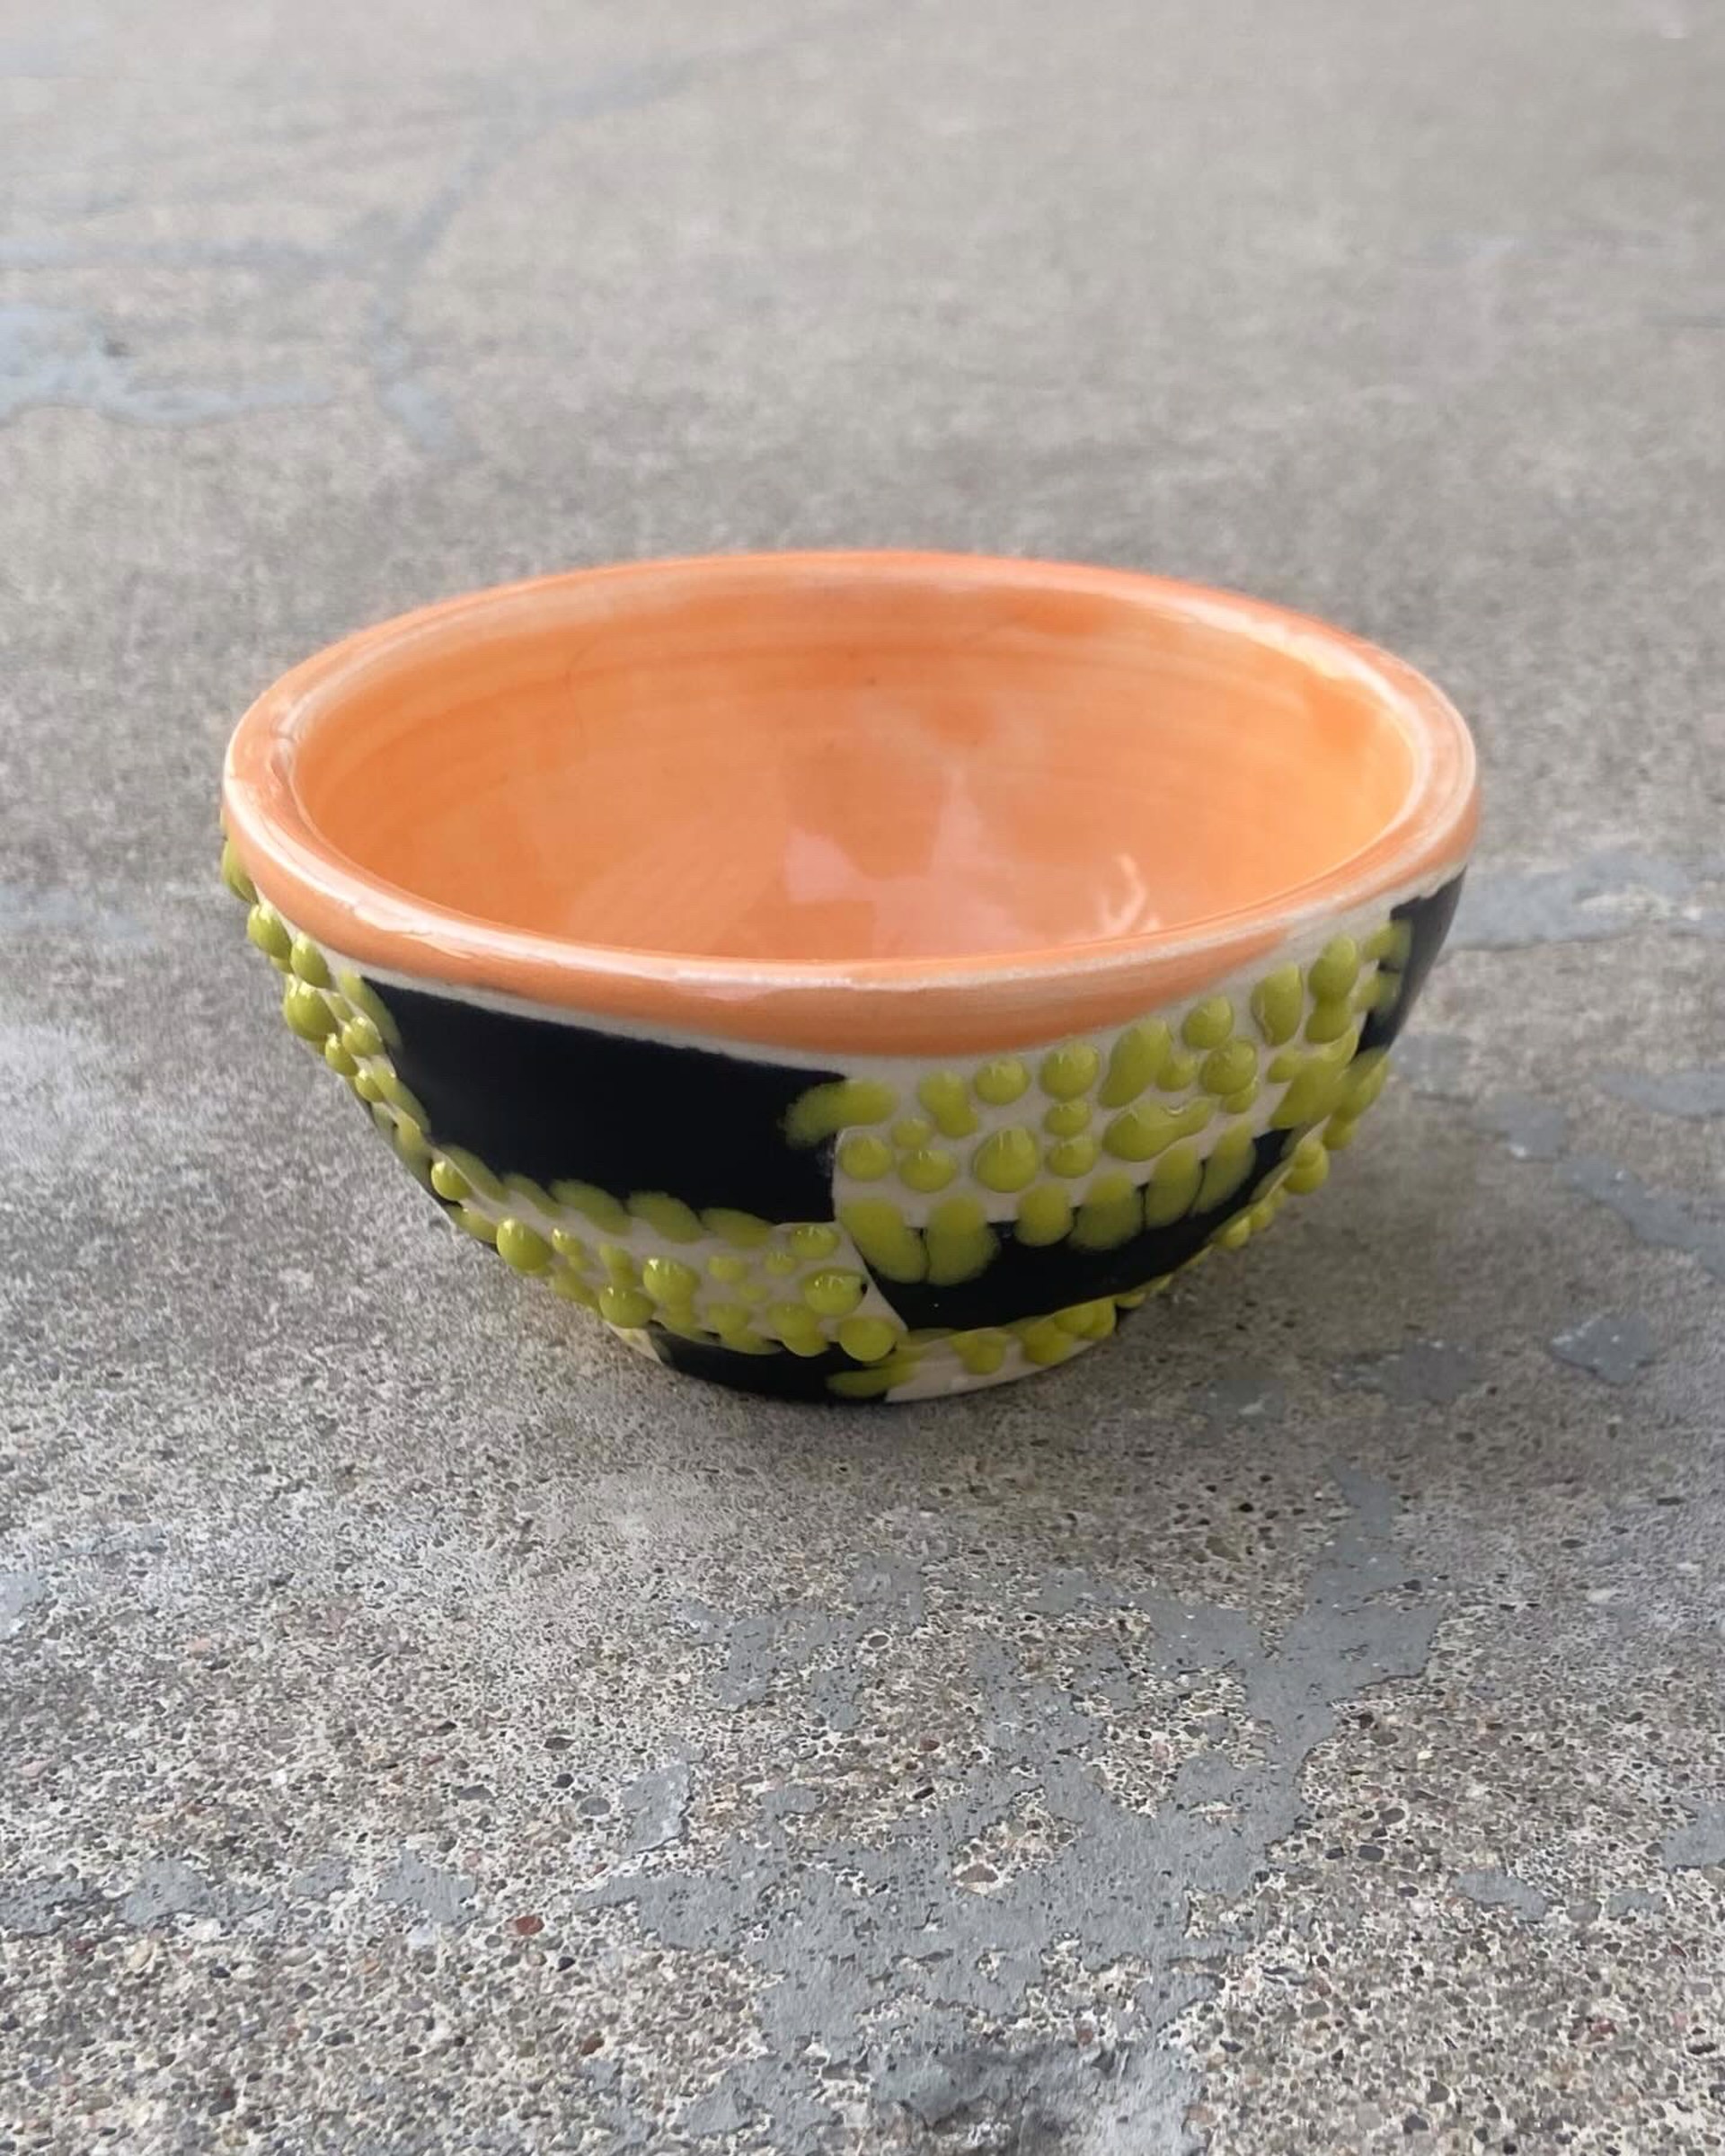 Checkered Gloopy Bowl 03 by Cassie Sullivan